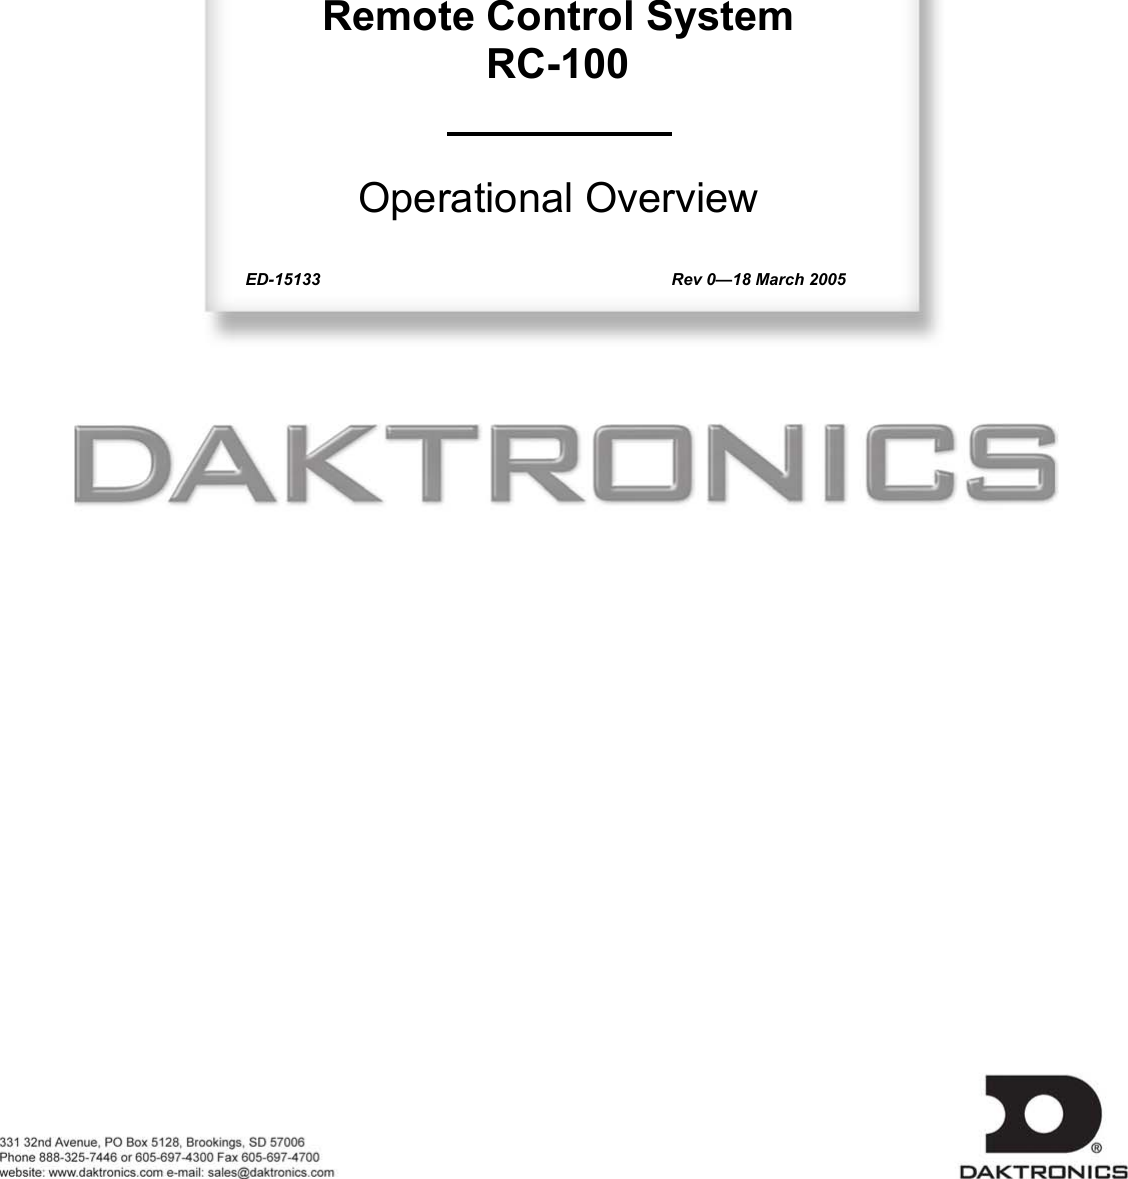   Remote Control System RC-100   Operational Overview  ED-15133                    Rev 0—18 March 2005 